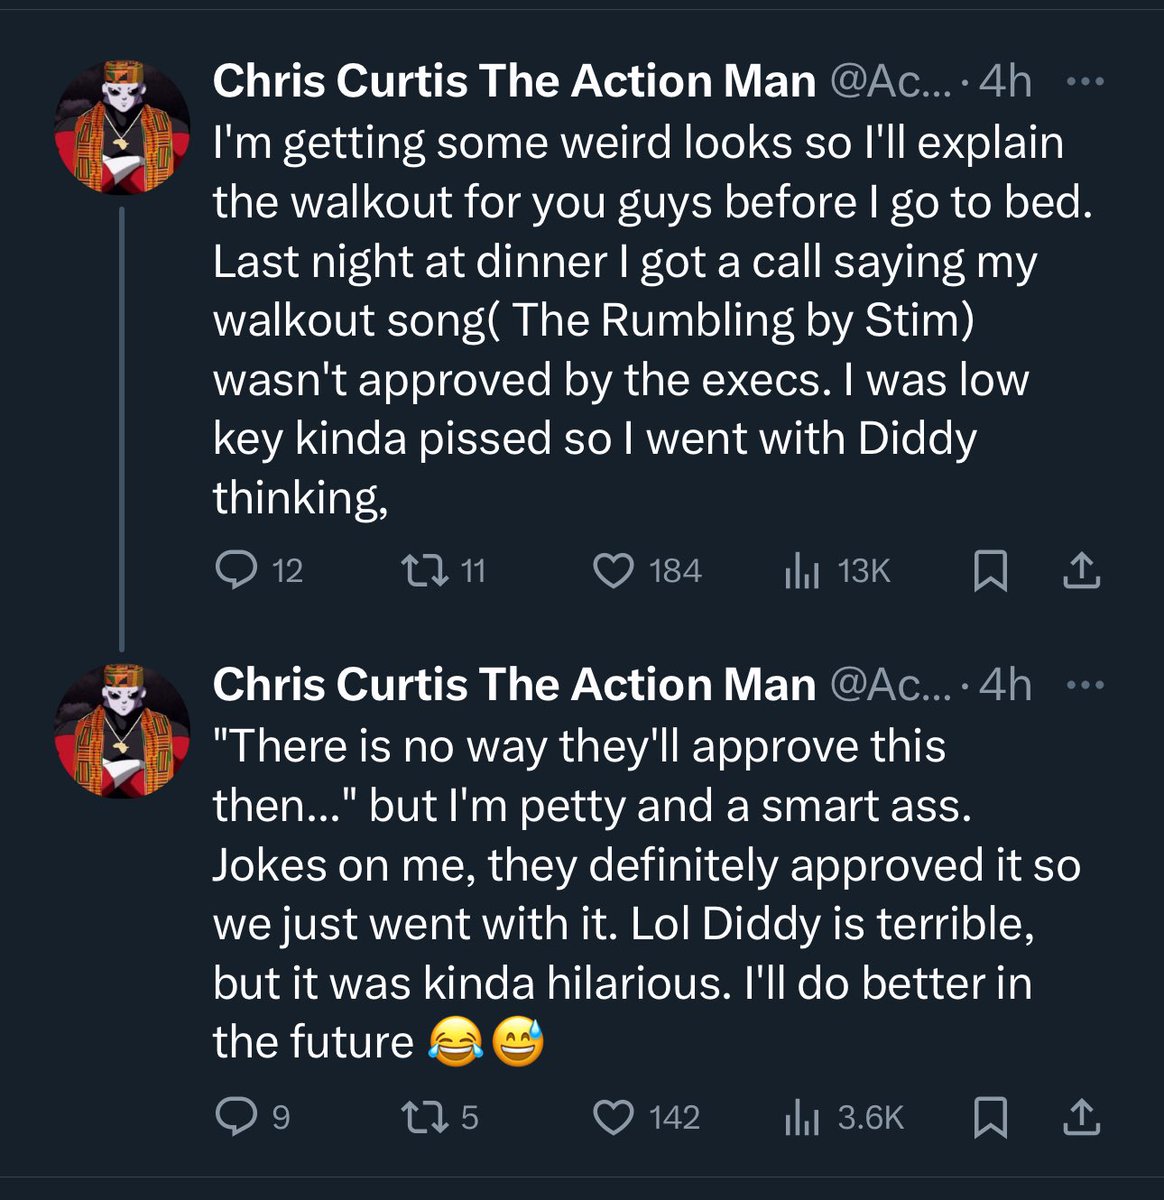 Chris Curtis's explanation for walking out to a Diddy song is incredible